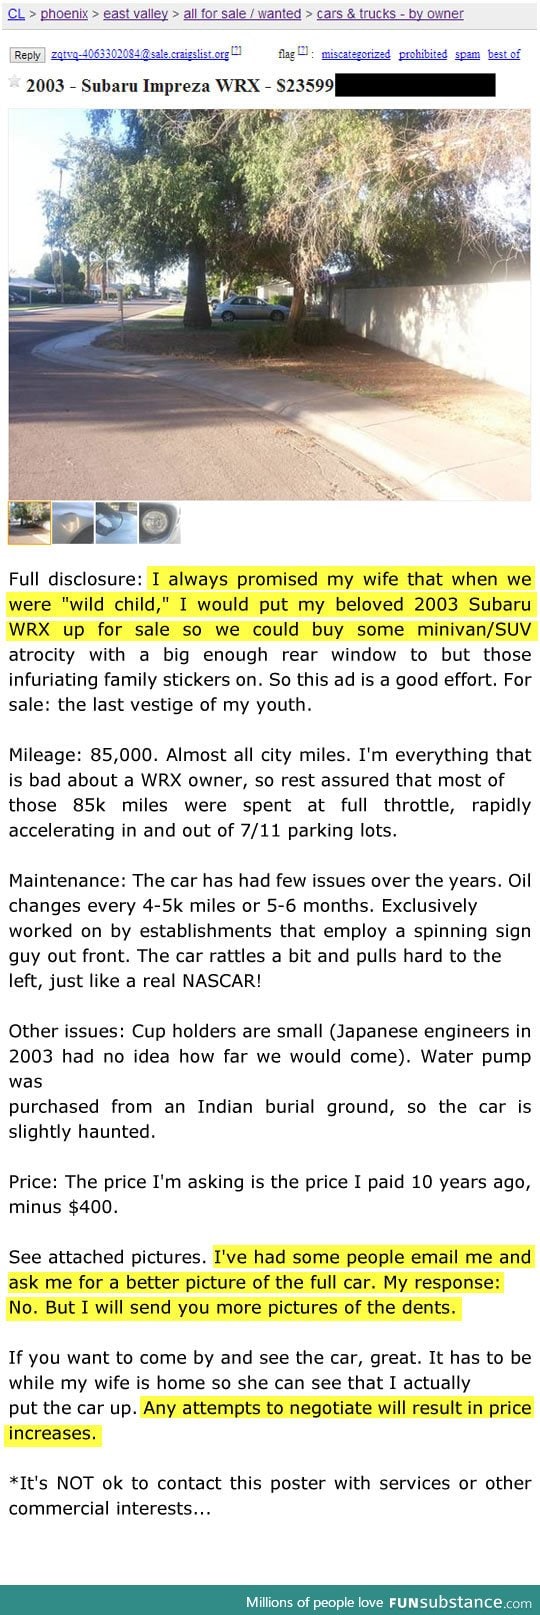 Man doesn't want to sell his Subaru